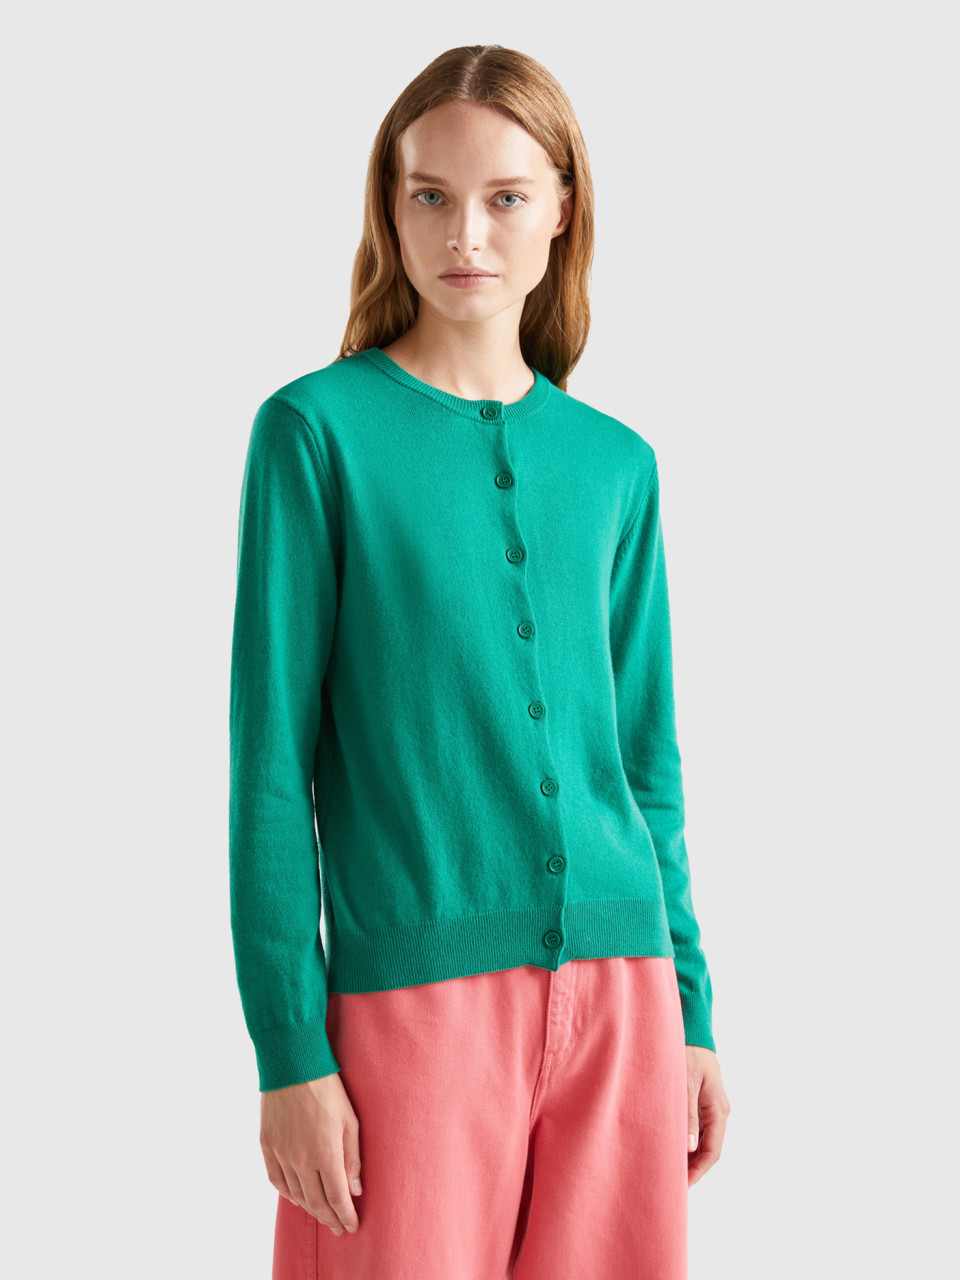 Benetton, Forest Green Cardigan In Cashmere And Wool Blend, Green, Women